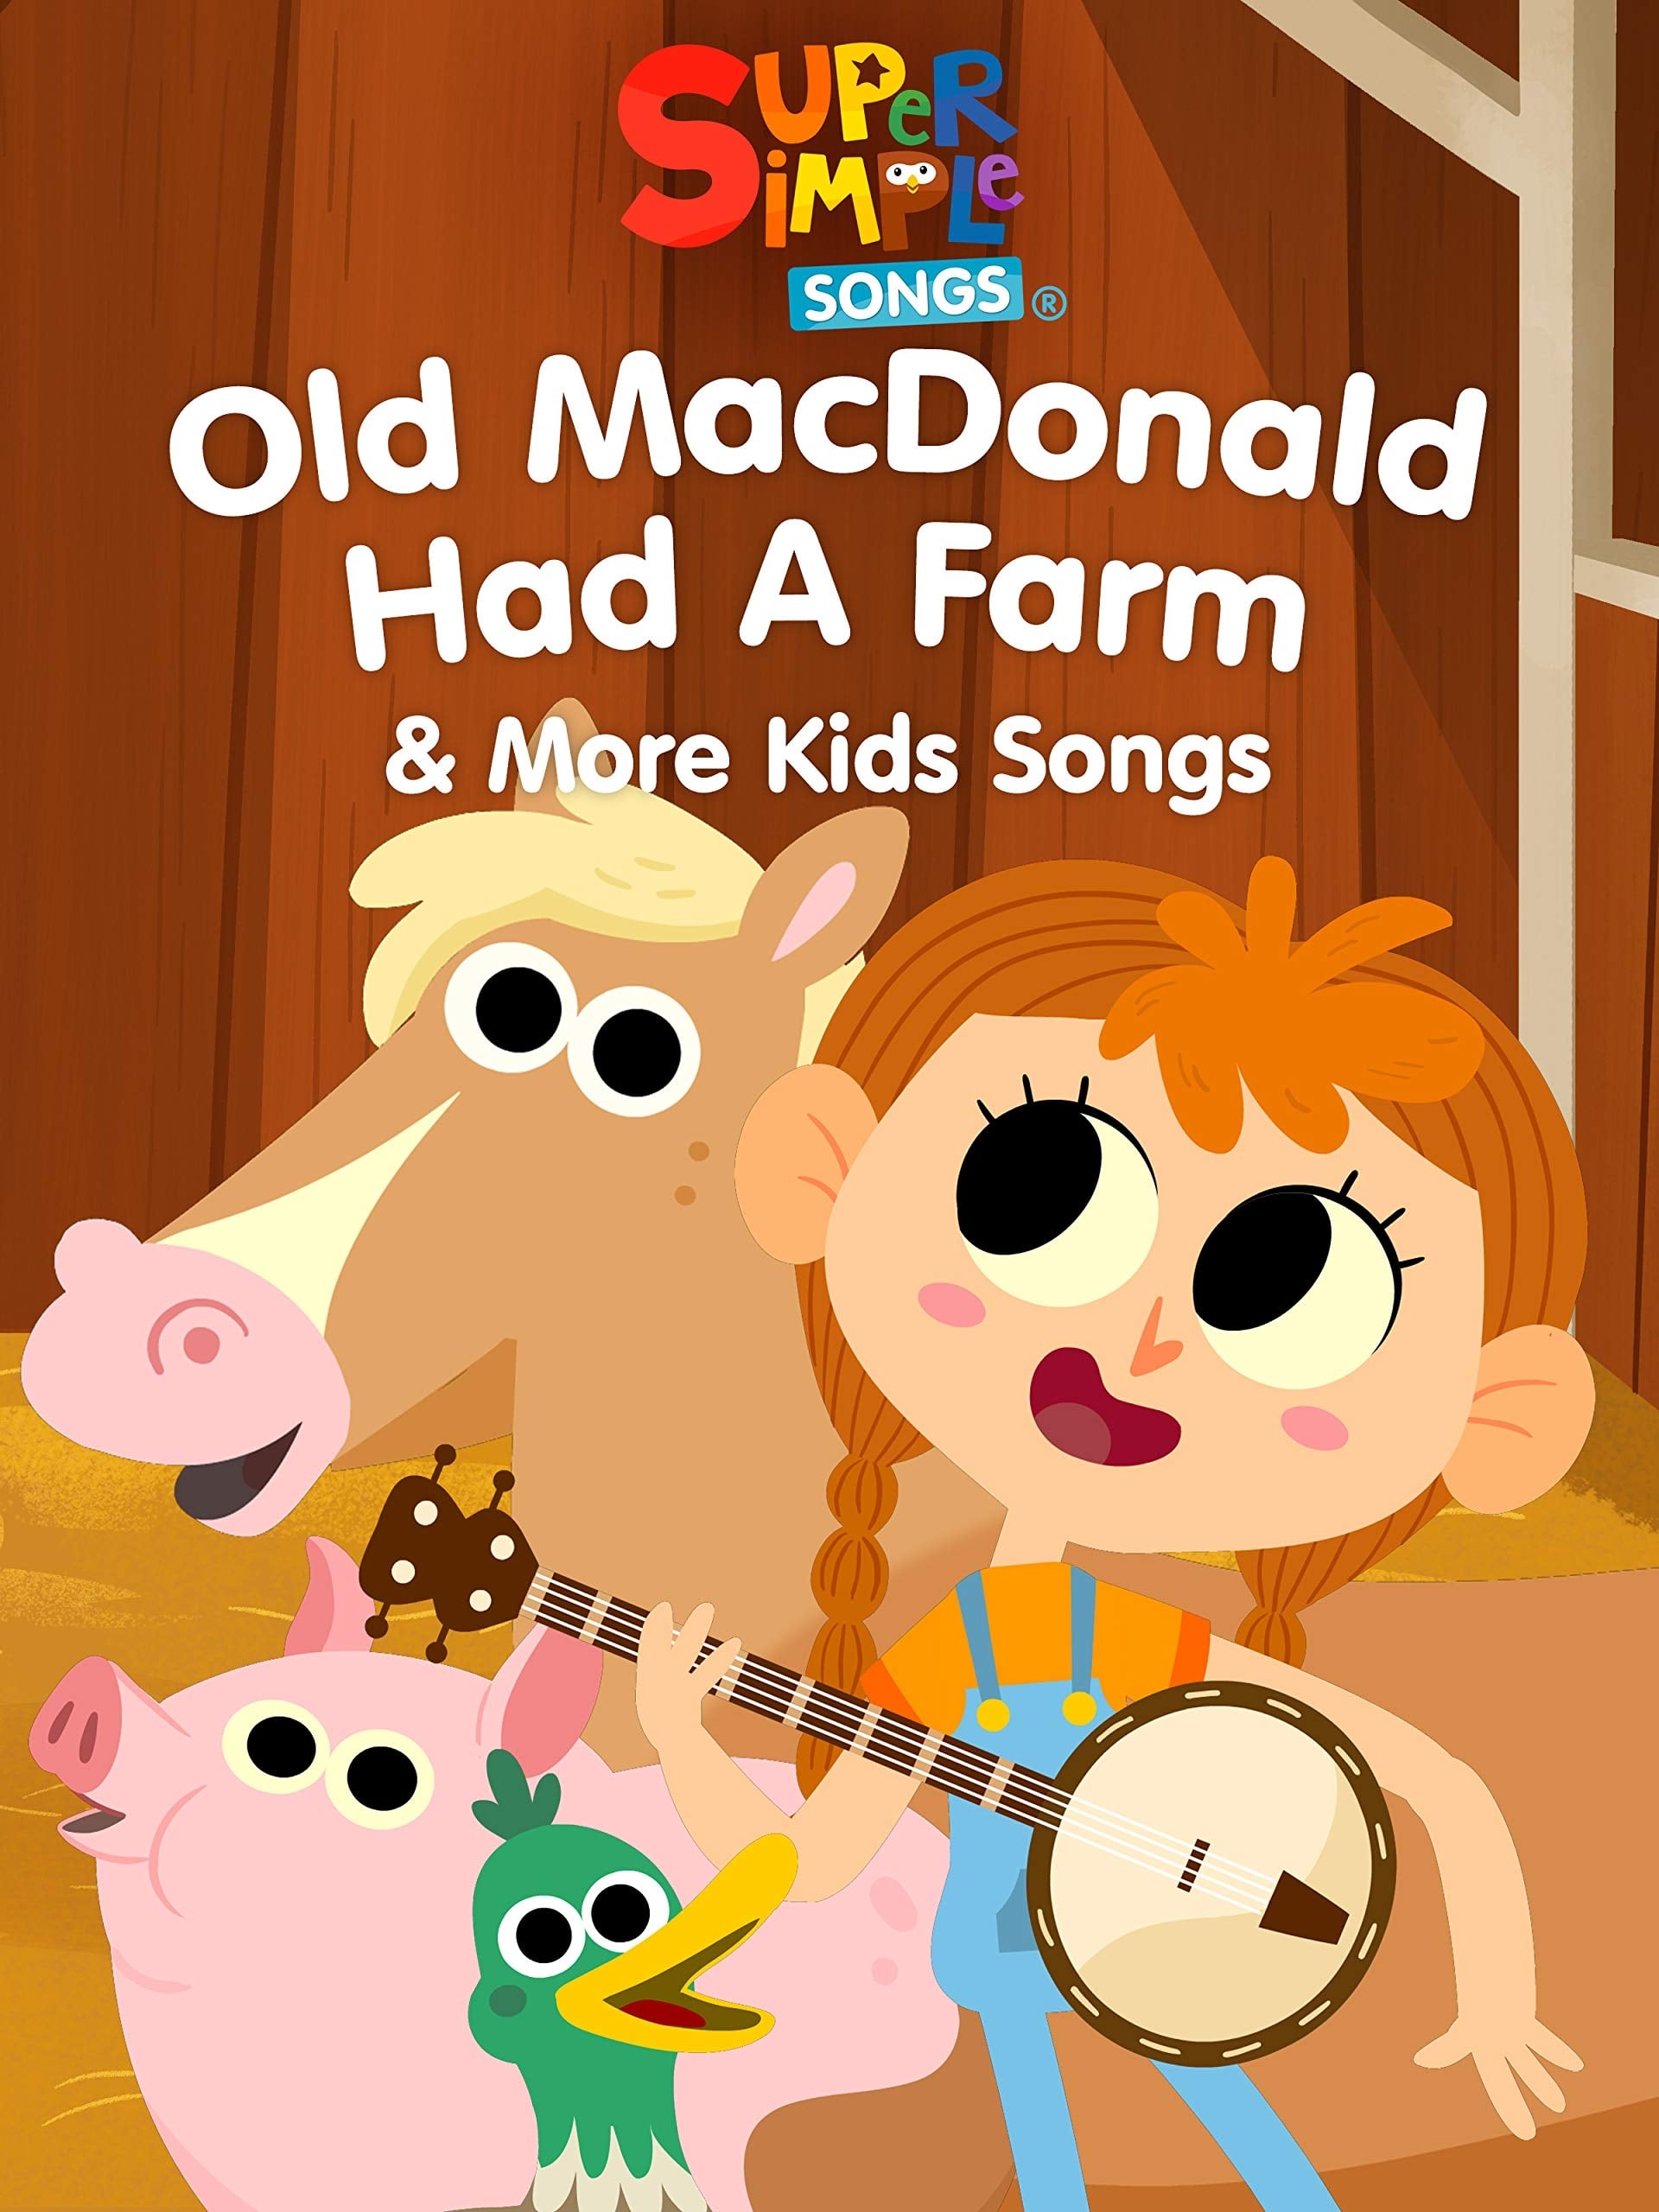 Old MacDonald Had a Farm & More Kids Songs: Super Simple Songs